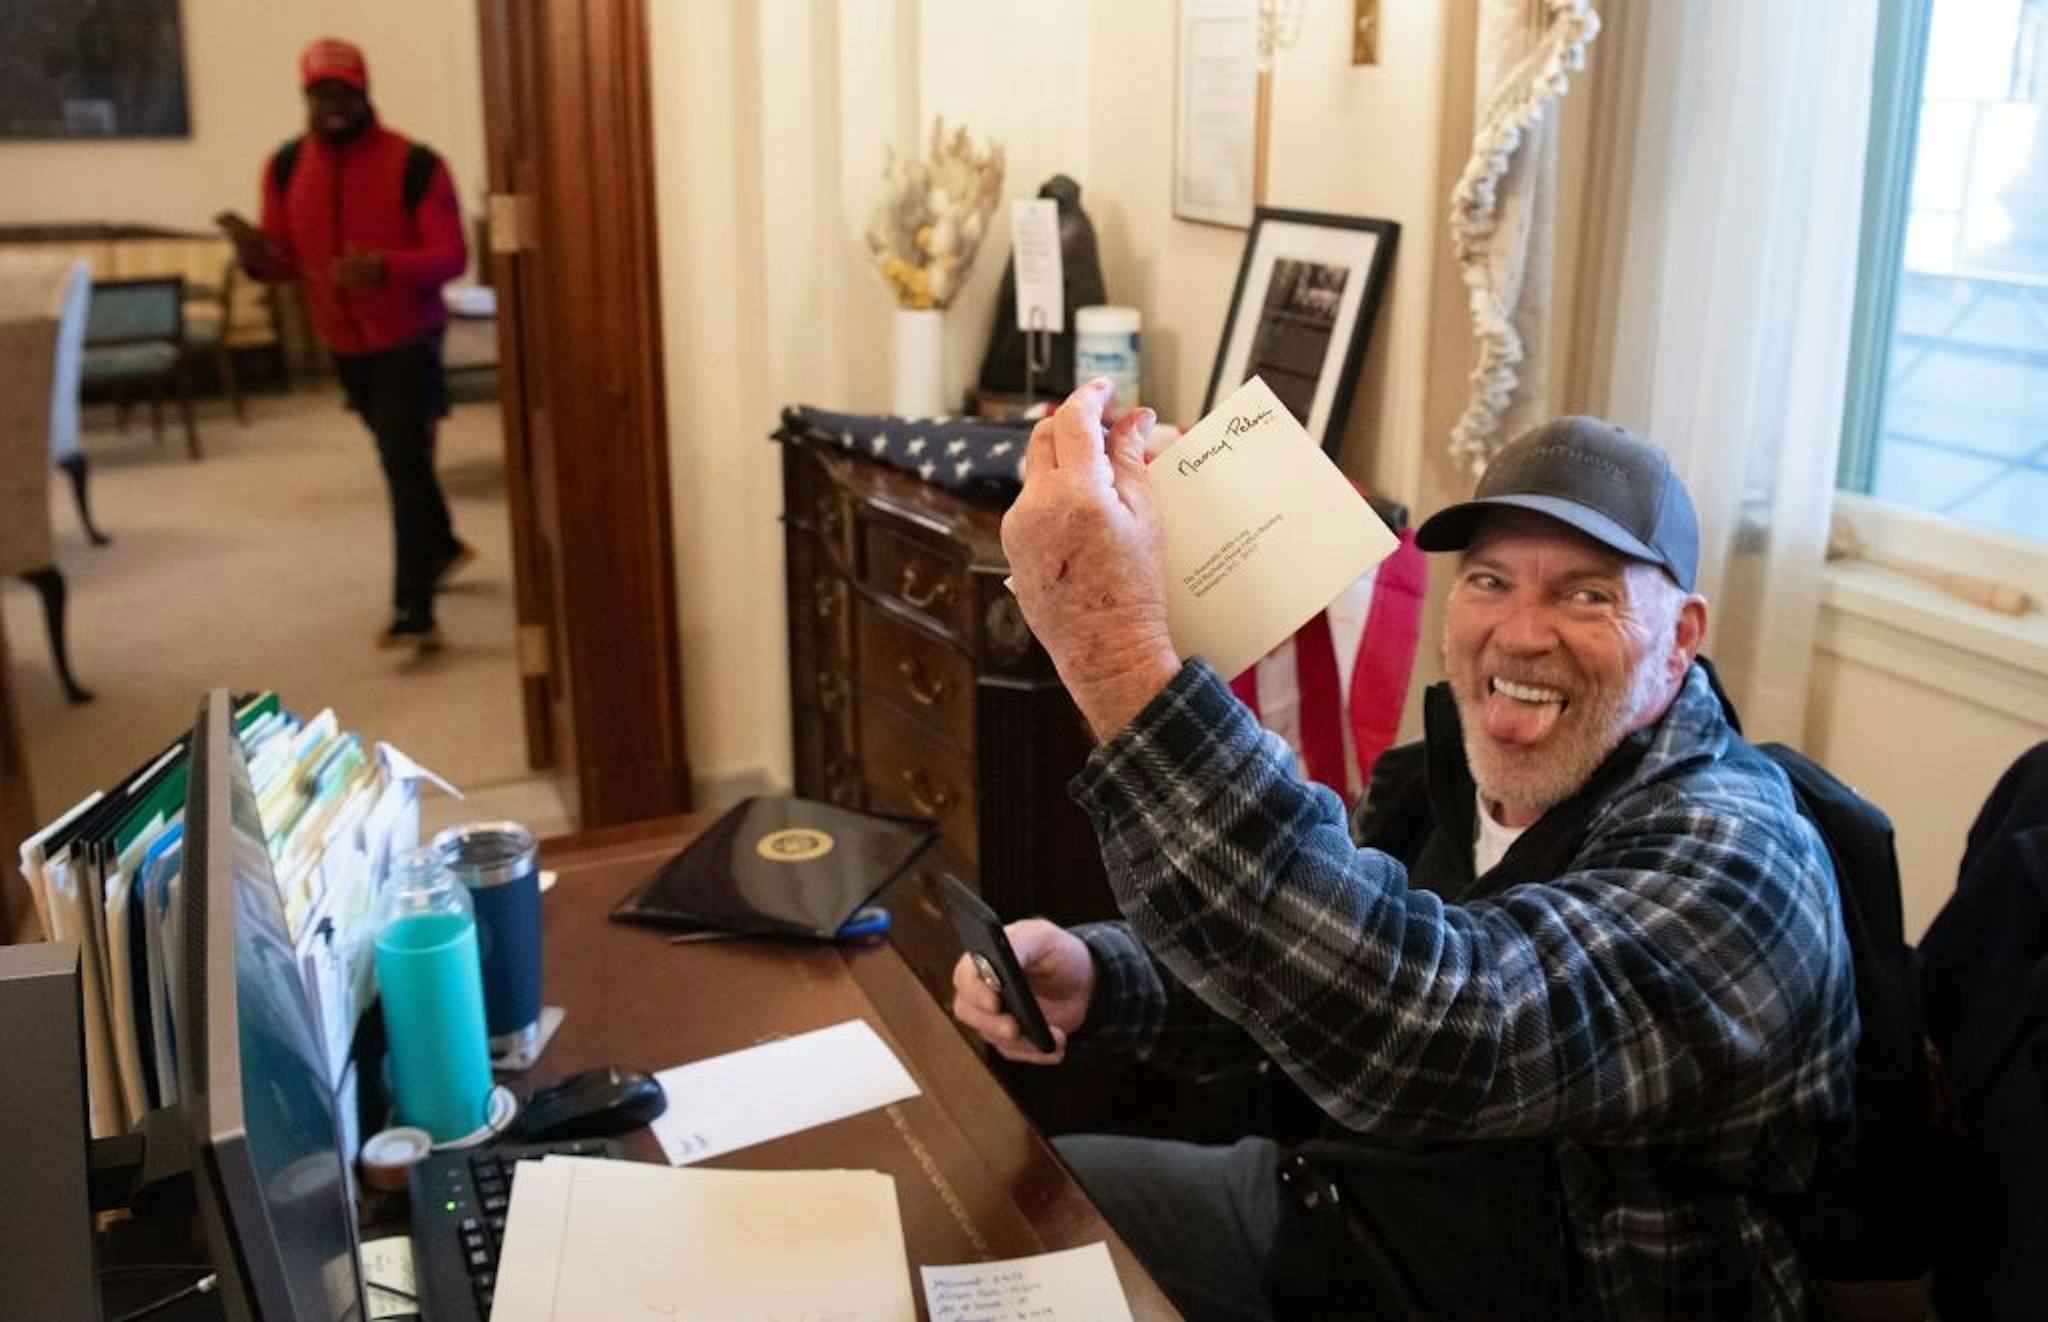 (FILES) Richard Barnett, a supporter of US President Donald Trump, holds a piece of mail as he sits inside the office of US Speaker of the House Nancy Pelosi after protestors breached the US Capitol in the US Capitol in Washington, DC, January 6, 2021. - Demonstrators breeched security and entered the Capitol as Congress debated the 2020 presidential election Electoral Vote Certification. (Photo by SAUL LOEB / AFP)